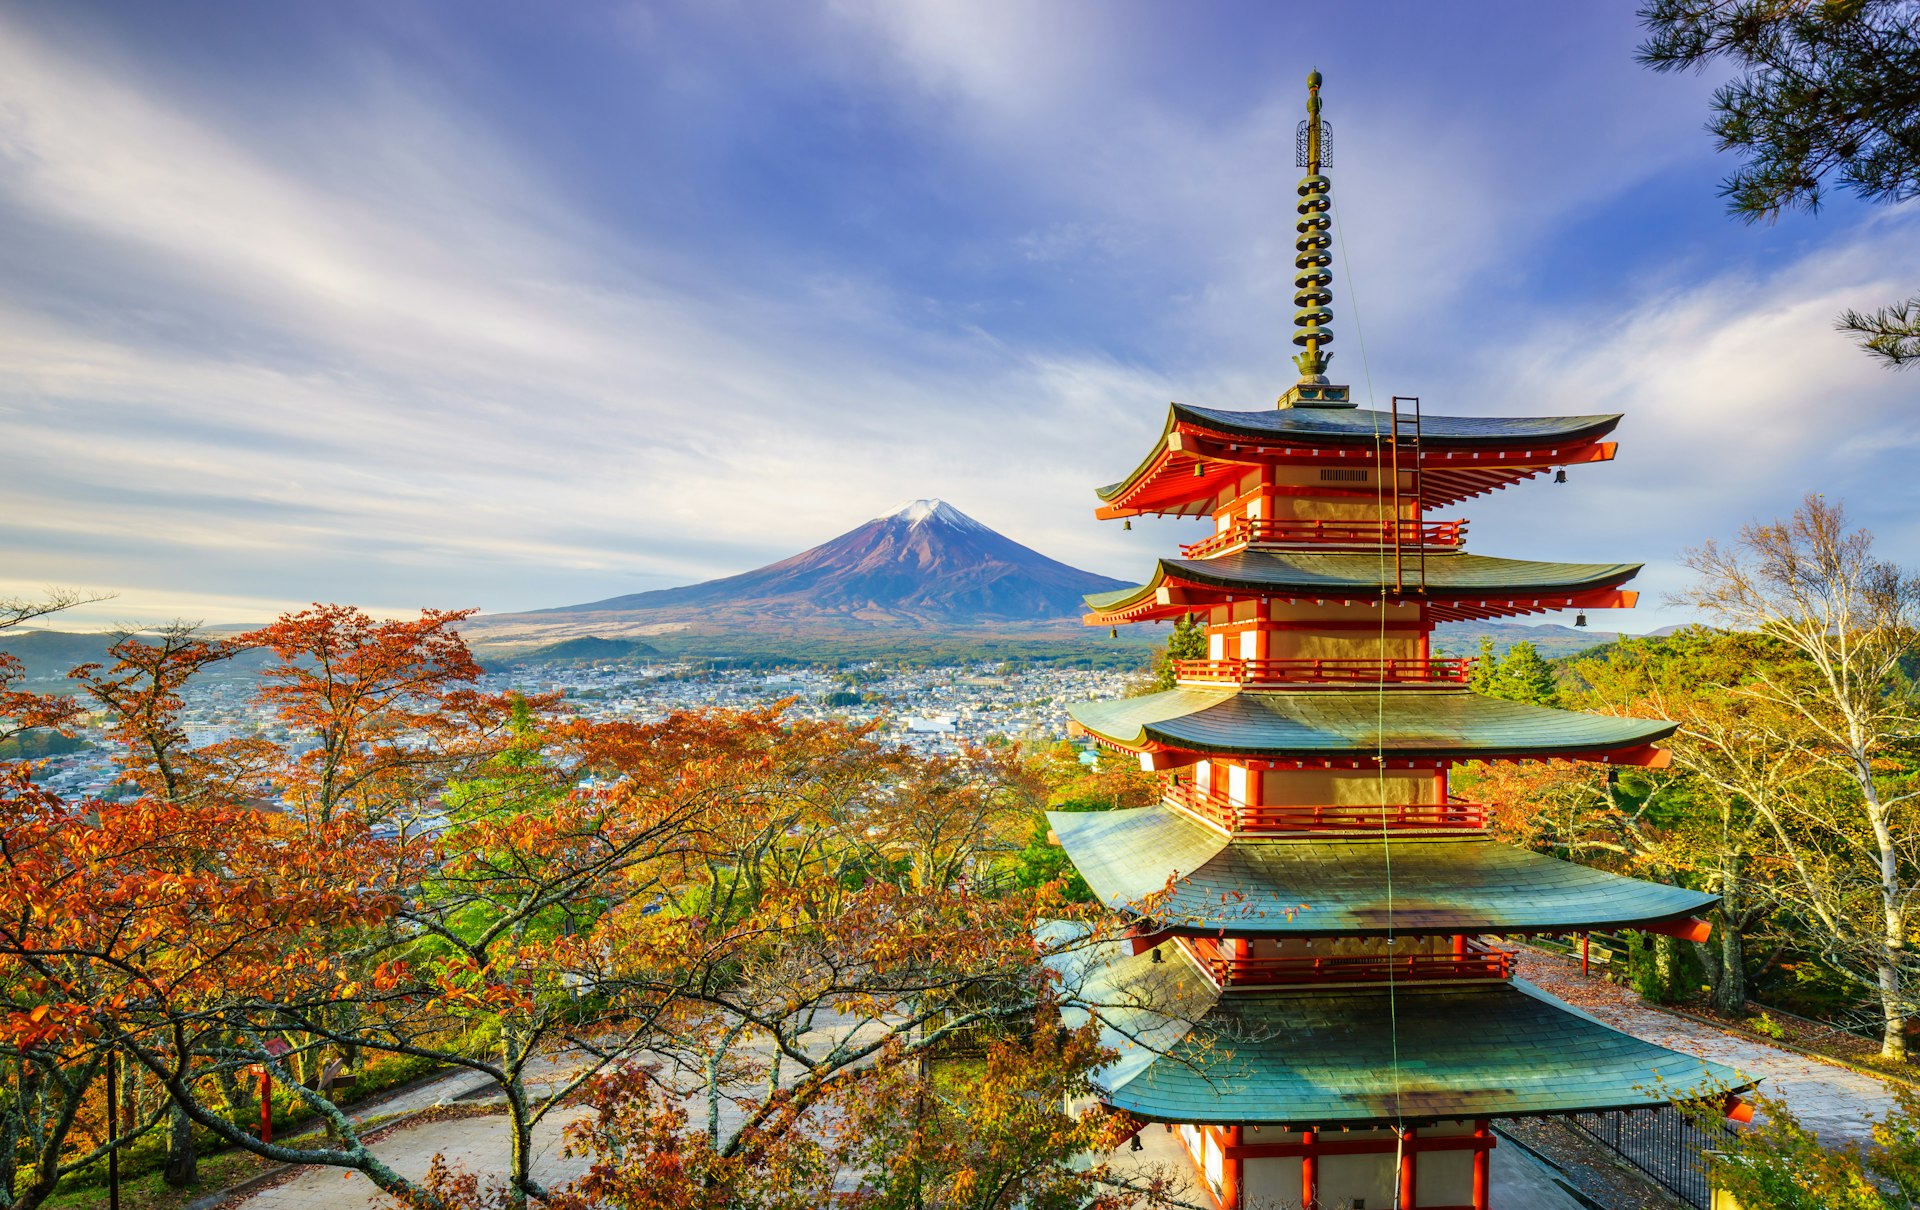 Mt. Fuji with Chureito Pagoda at sunrise and surrounded by autumn leaves. 